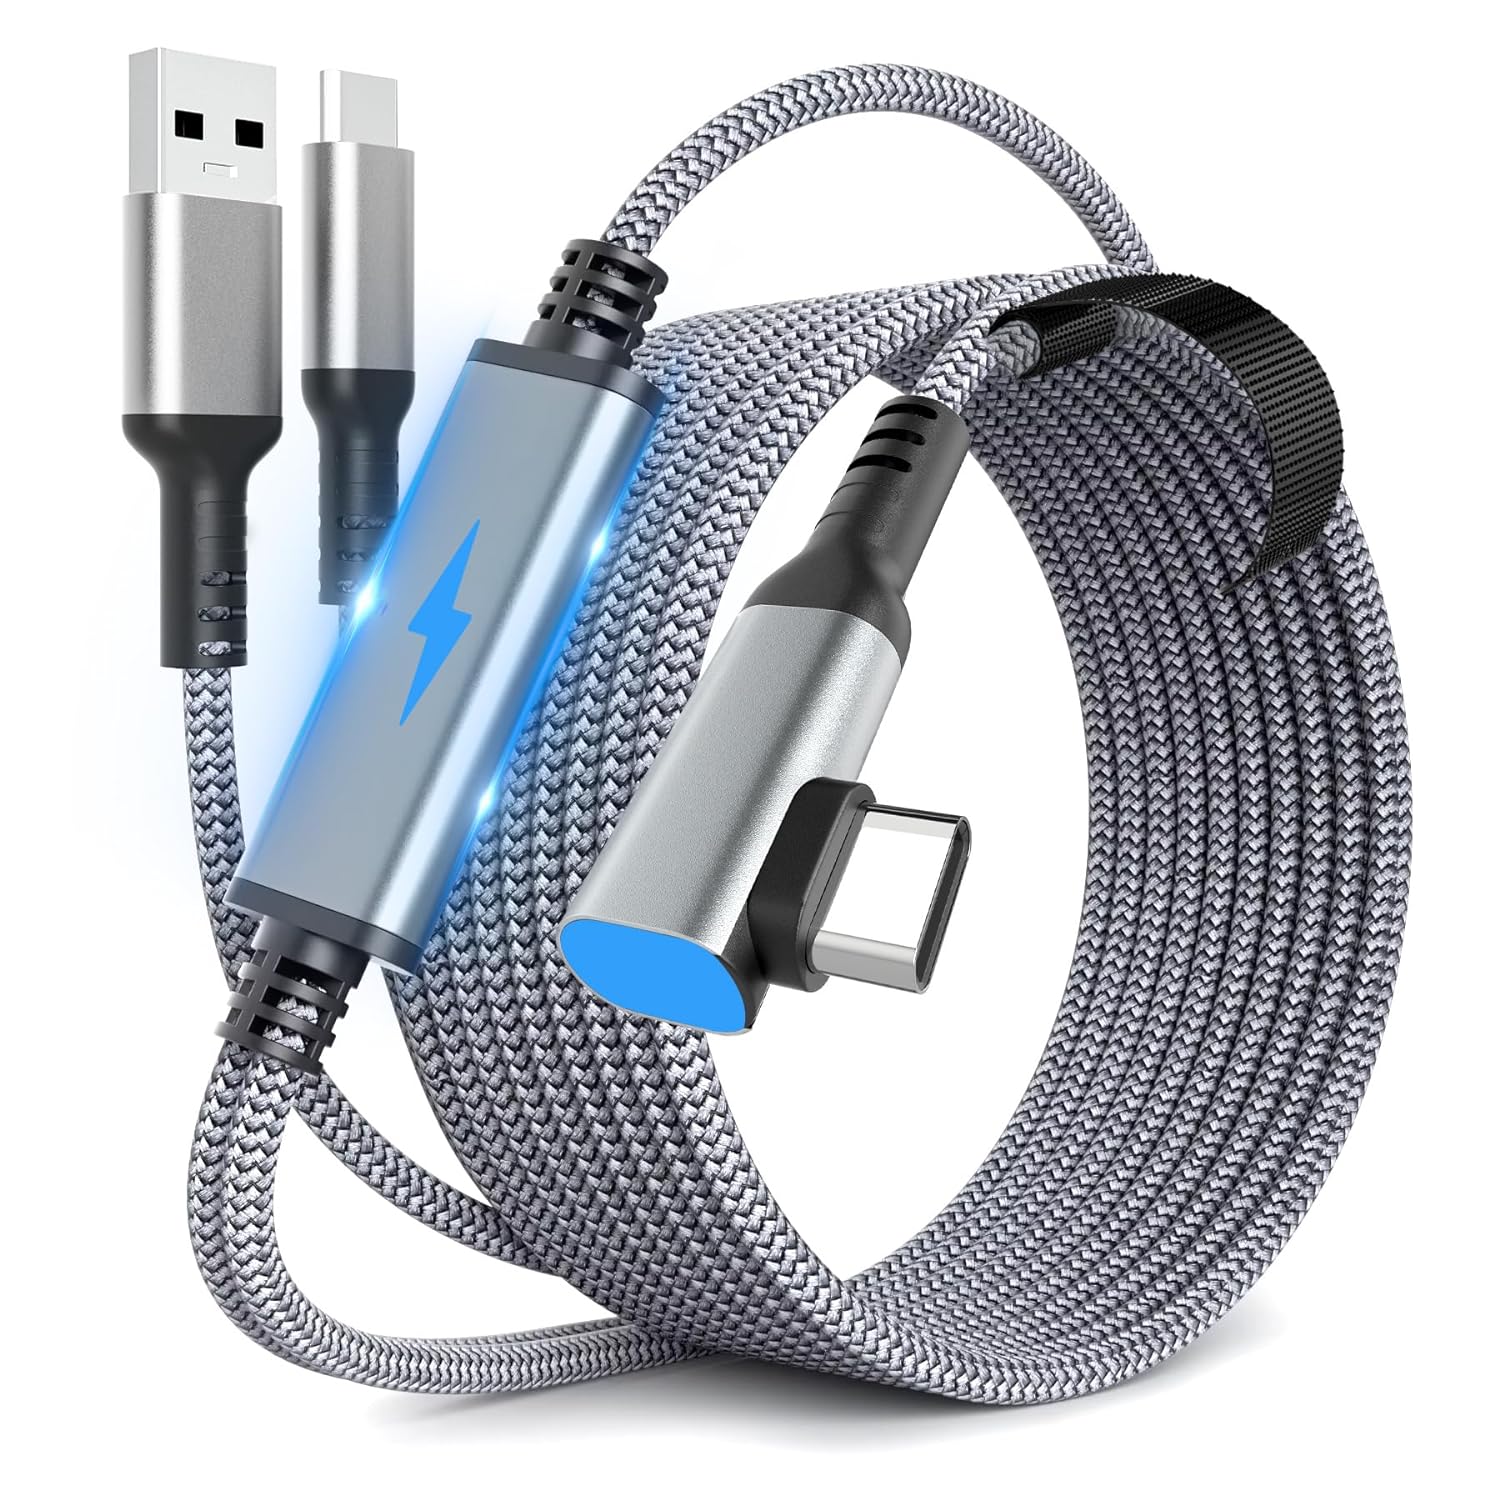 YRXVW Link Cable 16 FT Compatible with Oculus Quest 2/Pro/1 Accessories, 3 in 1 Charging While Playing All Day, with USB C Sufficient Power for VR Headset, High Speed Data Wire for Gaming PC Steam VR